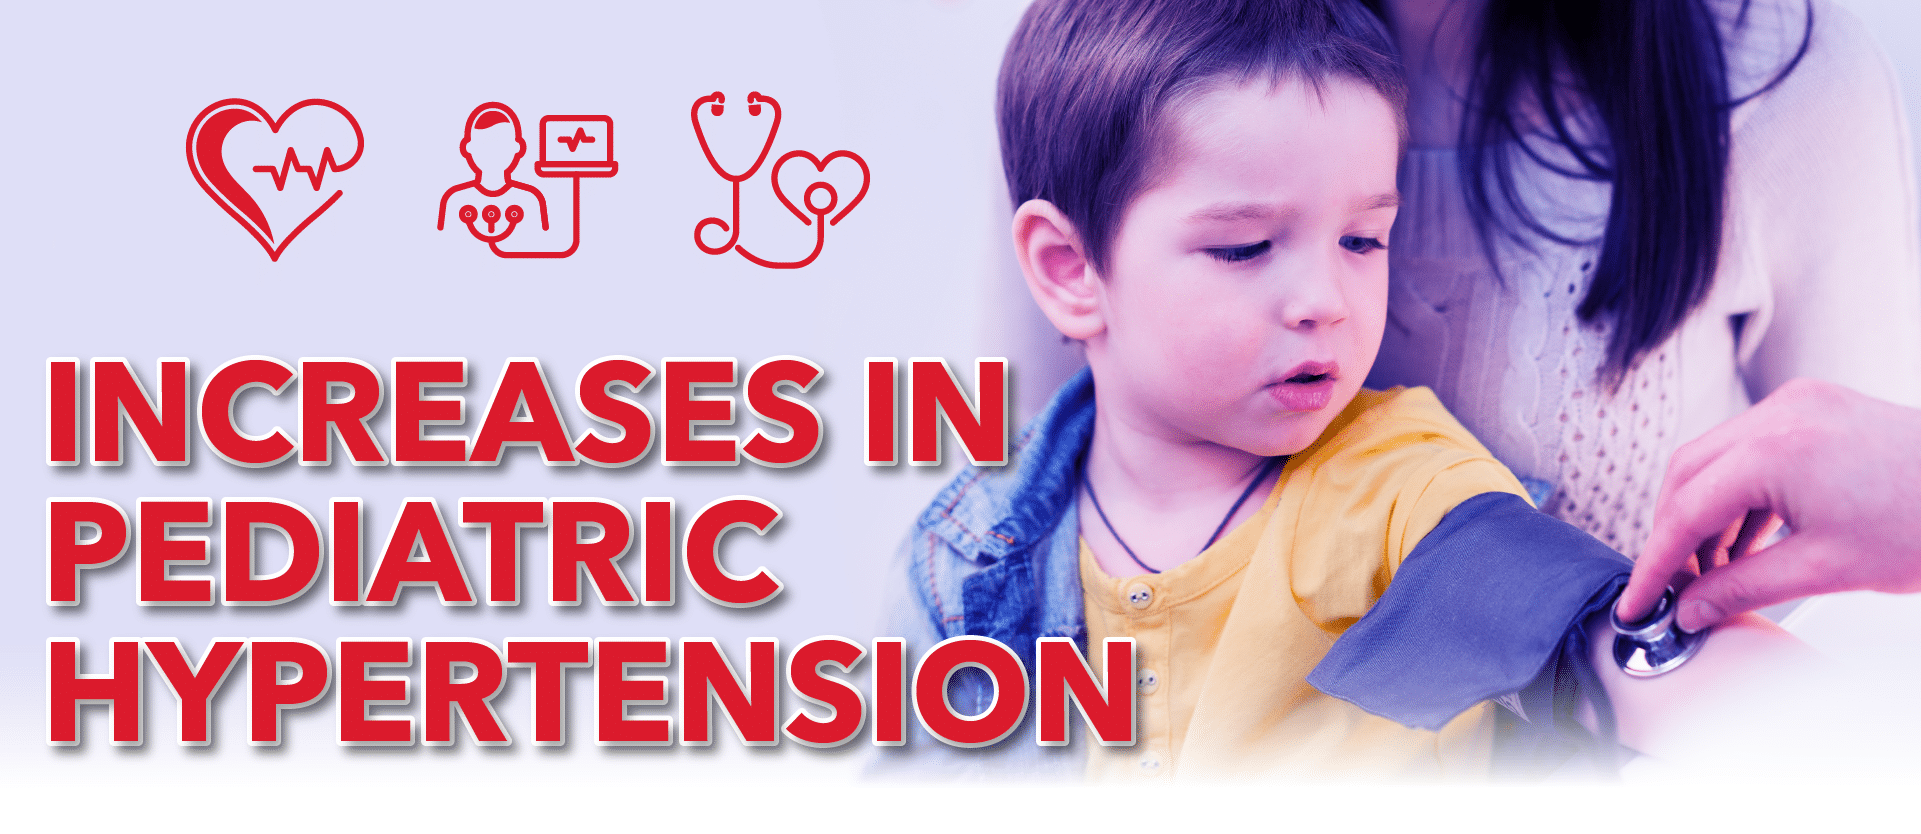 https://www.cardiometabolichealth.org/wp-content/uploads/2017/08/Increases-in-Pediatric-Hypertension-01.png